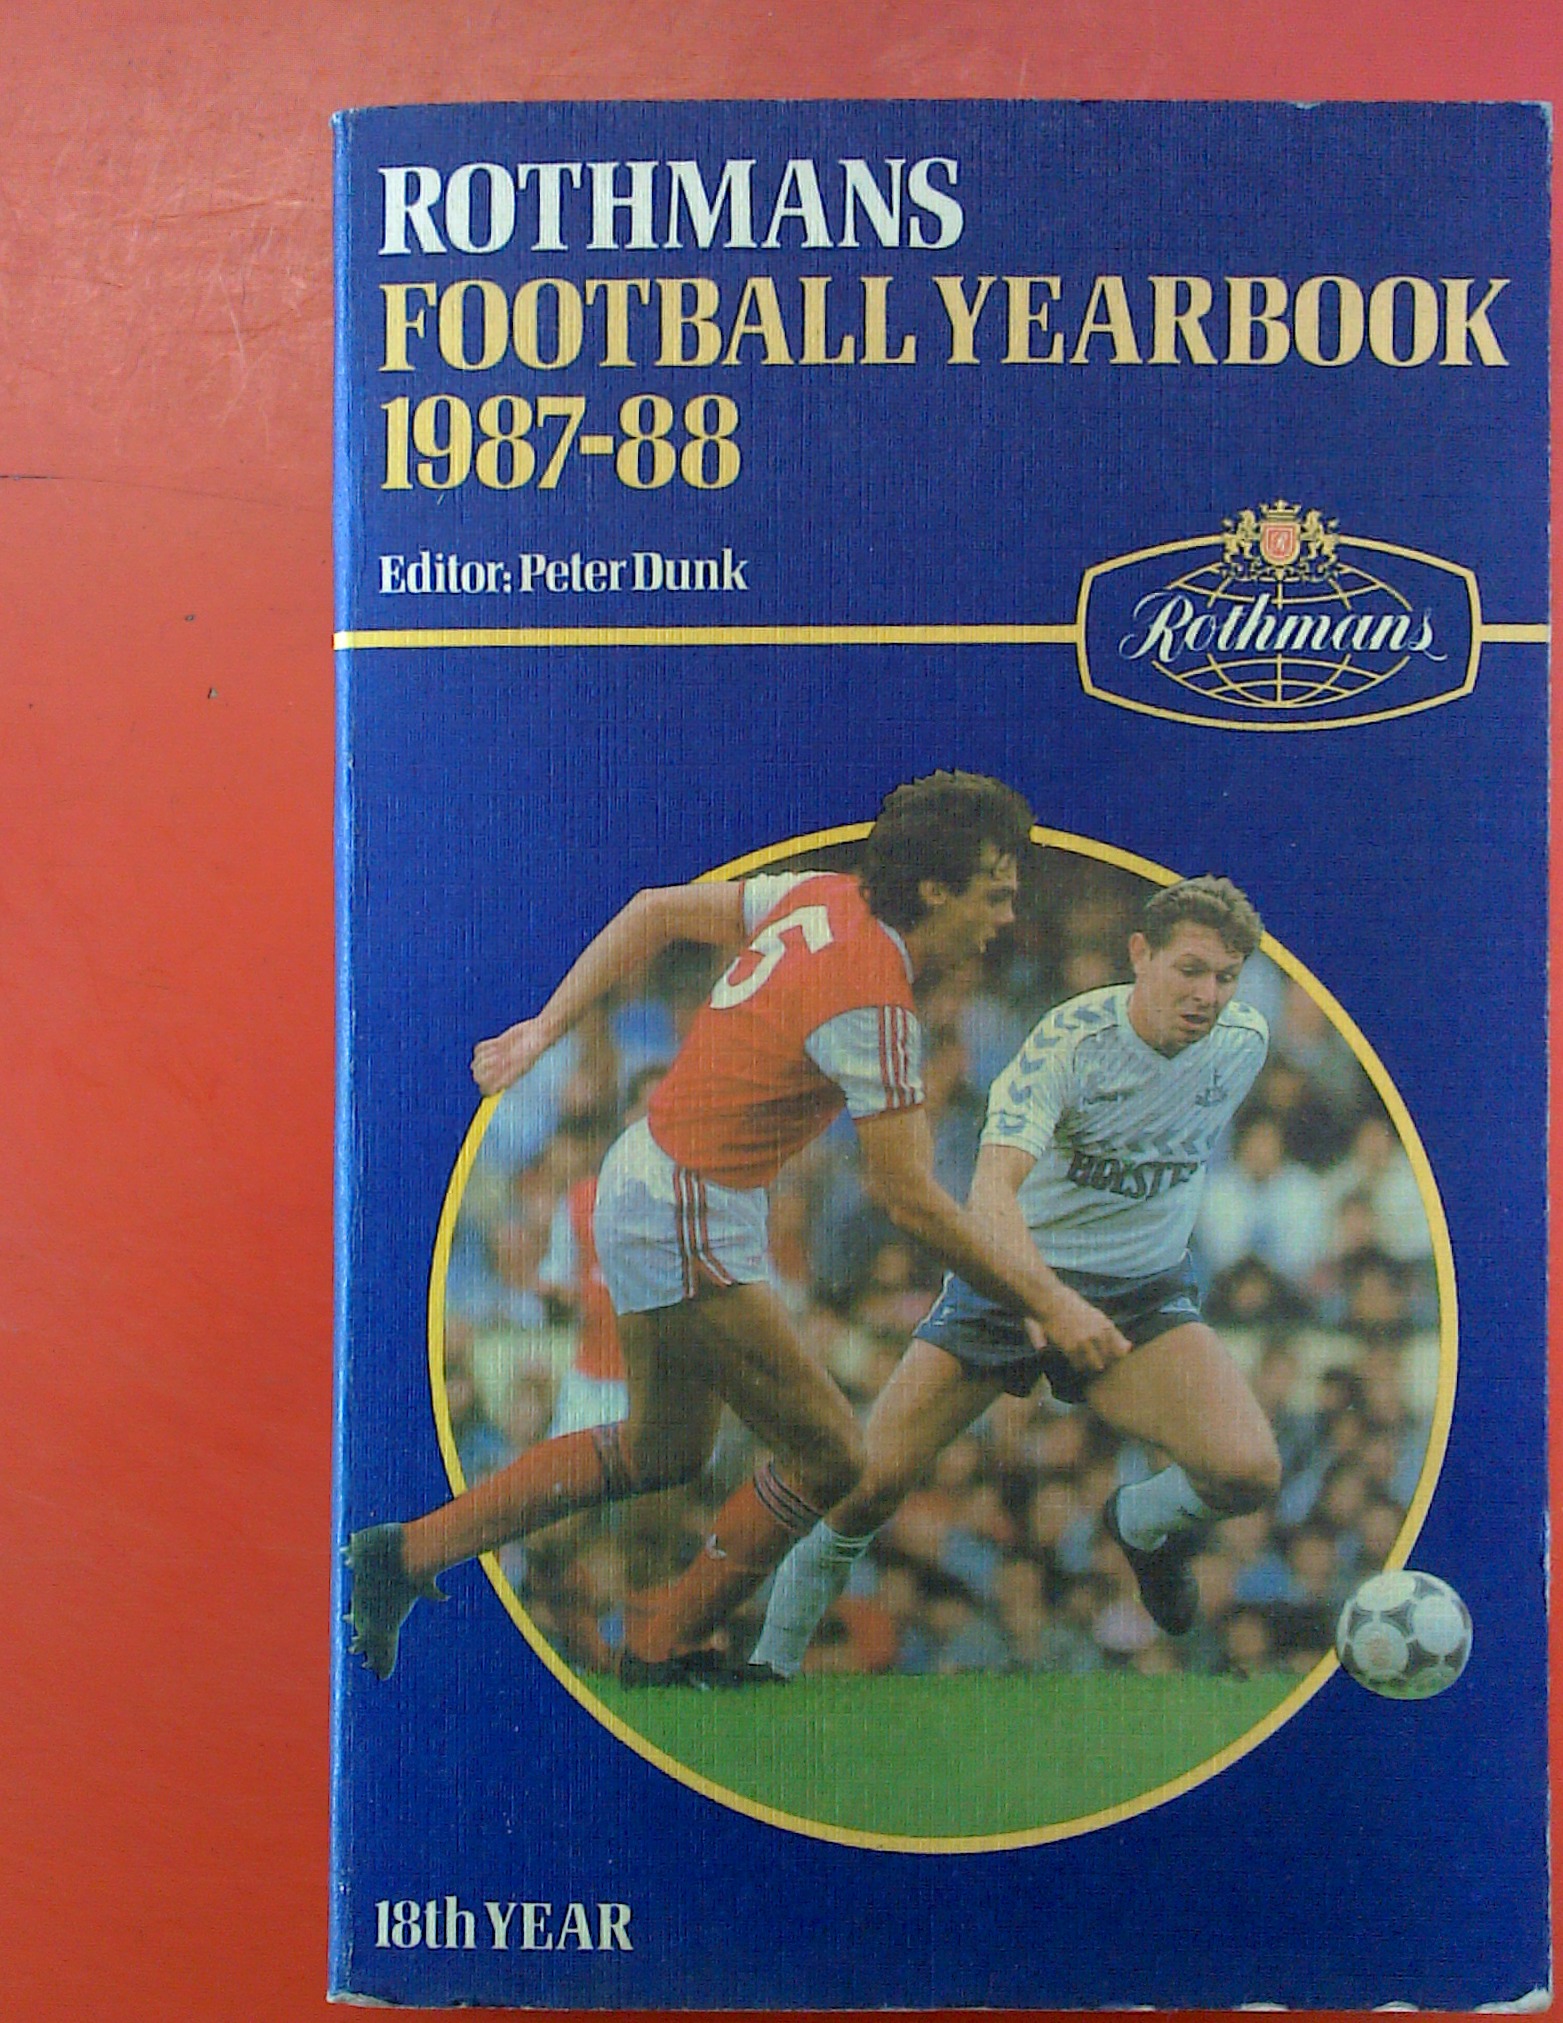 Rothmans Football Yearbook 1987-88 - Editor: Peter Dunk